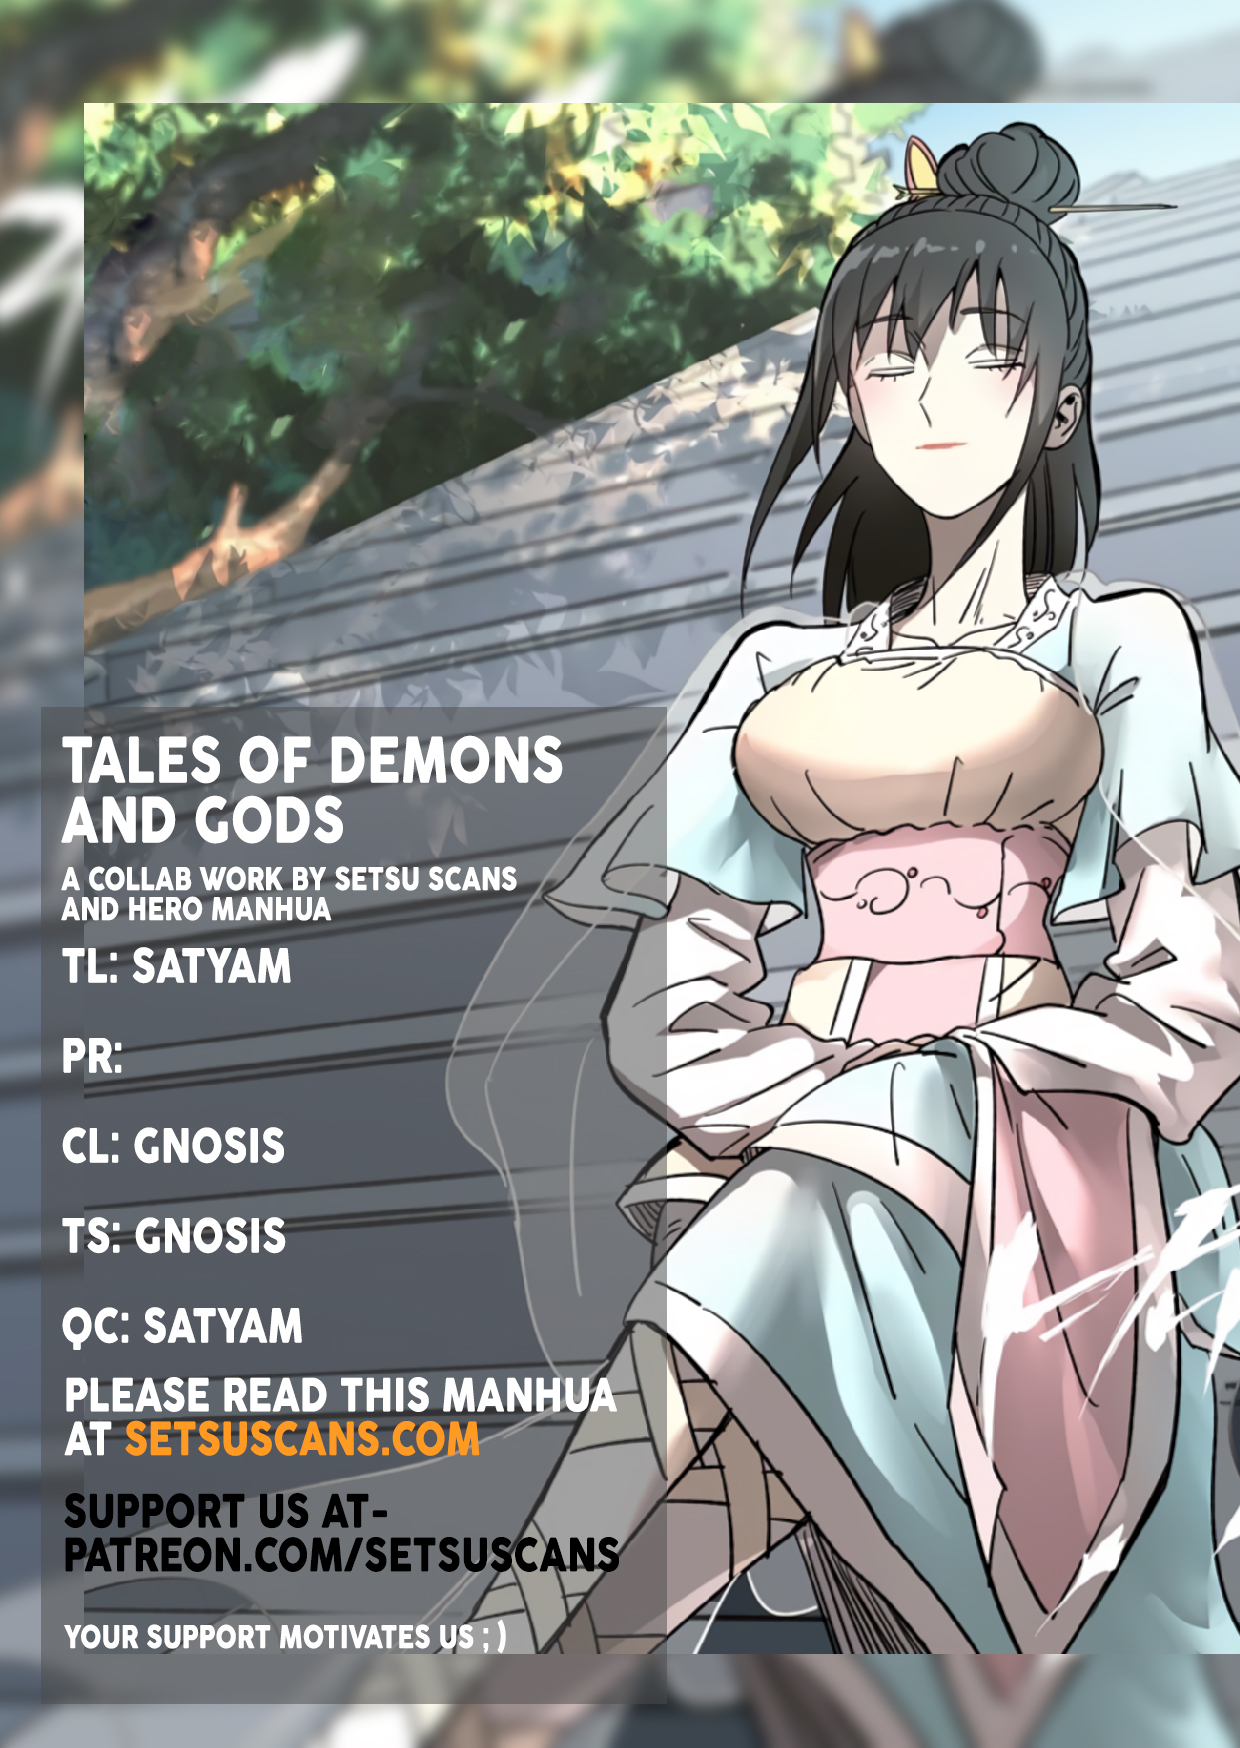 Tales of Demons and Gods - Chapter 14578 - Caught up again by Xiao Yu (2) - Image 1